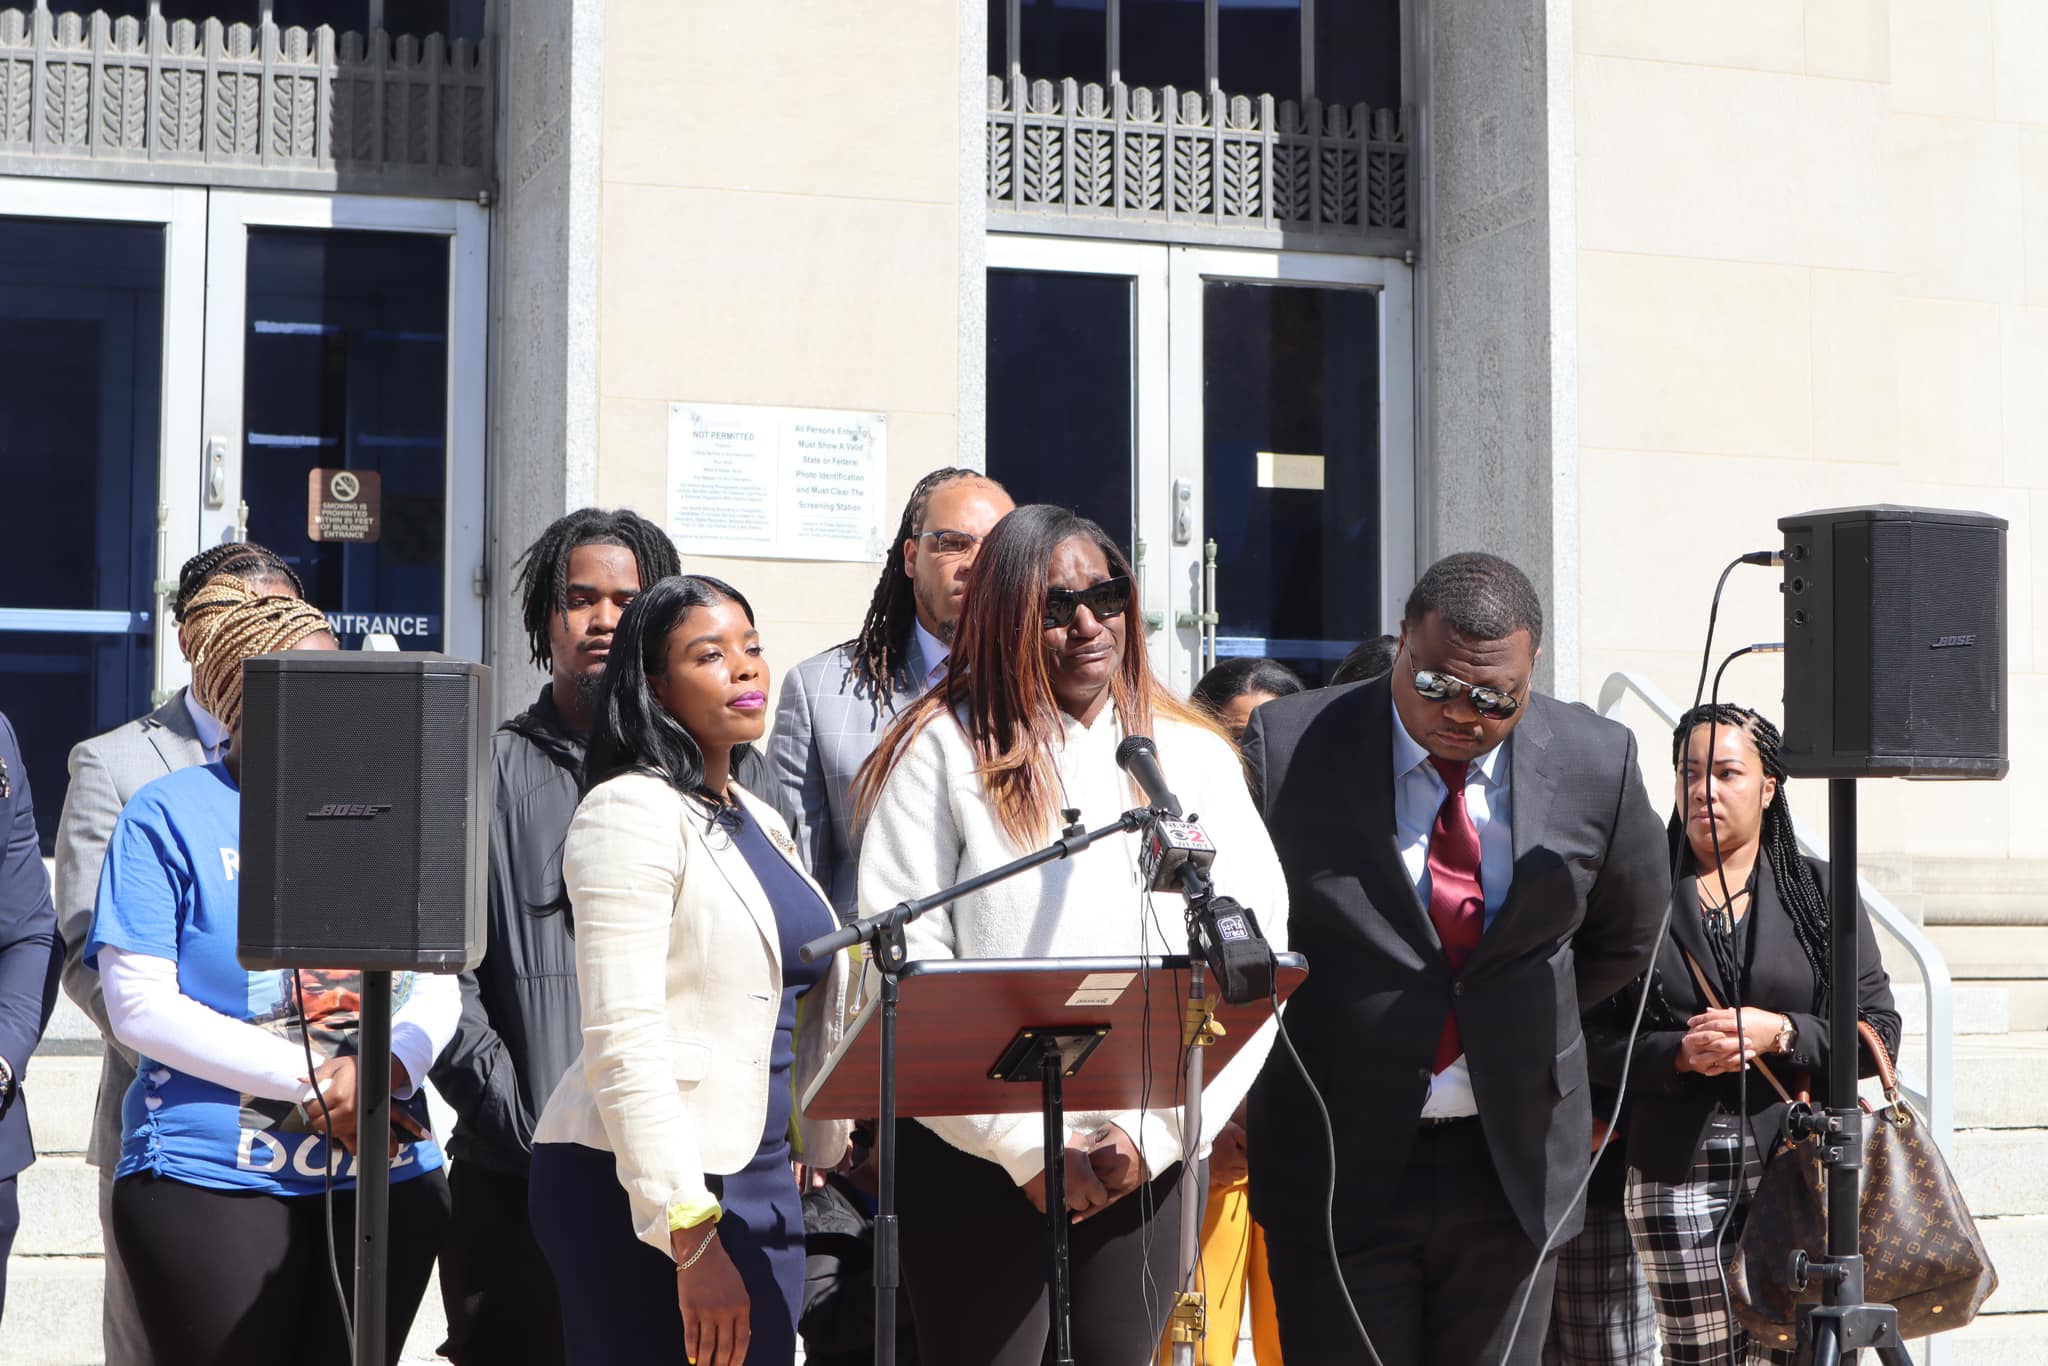 Doriety was joined by family, supporters, and attorneys Harry Daniels and Chimeaka White